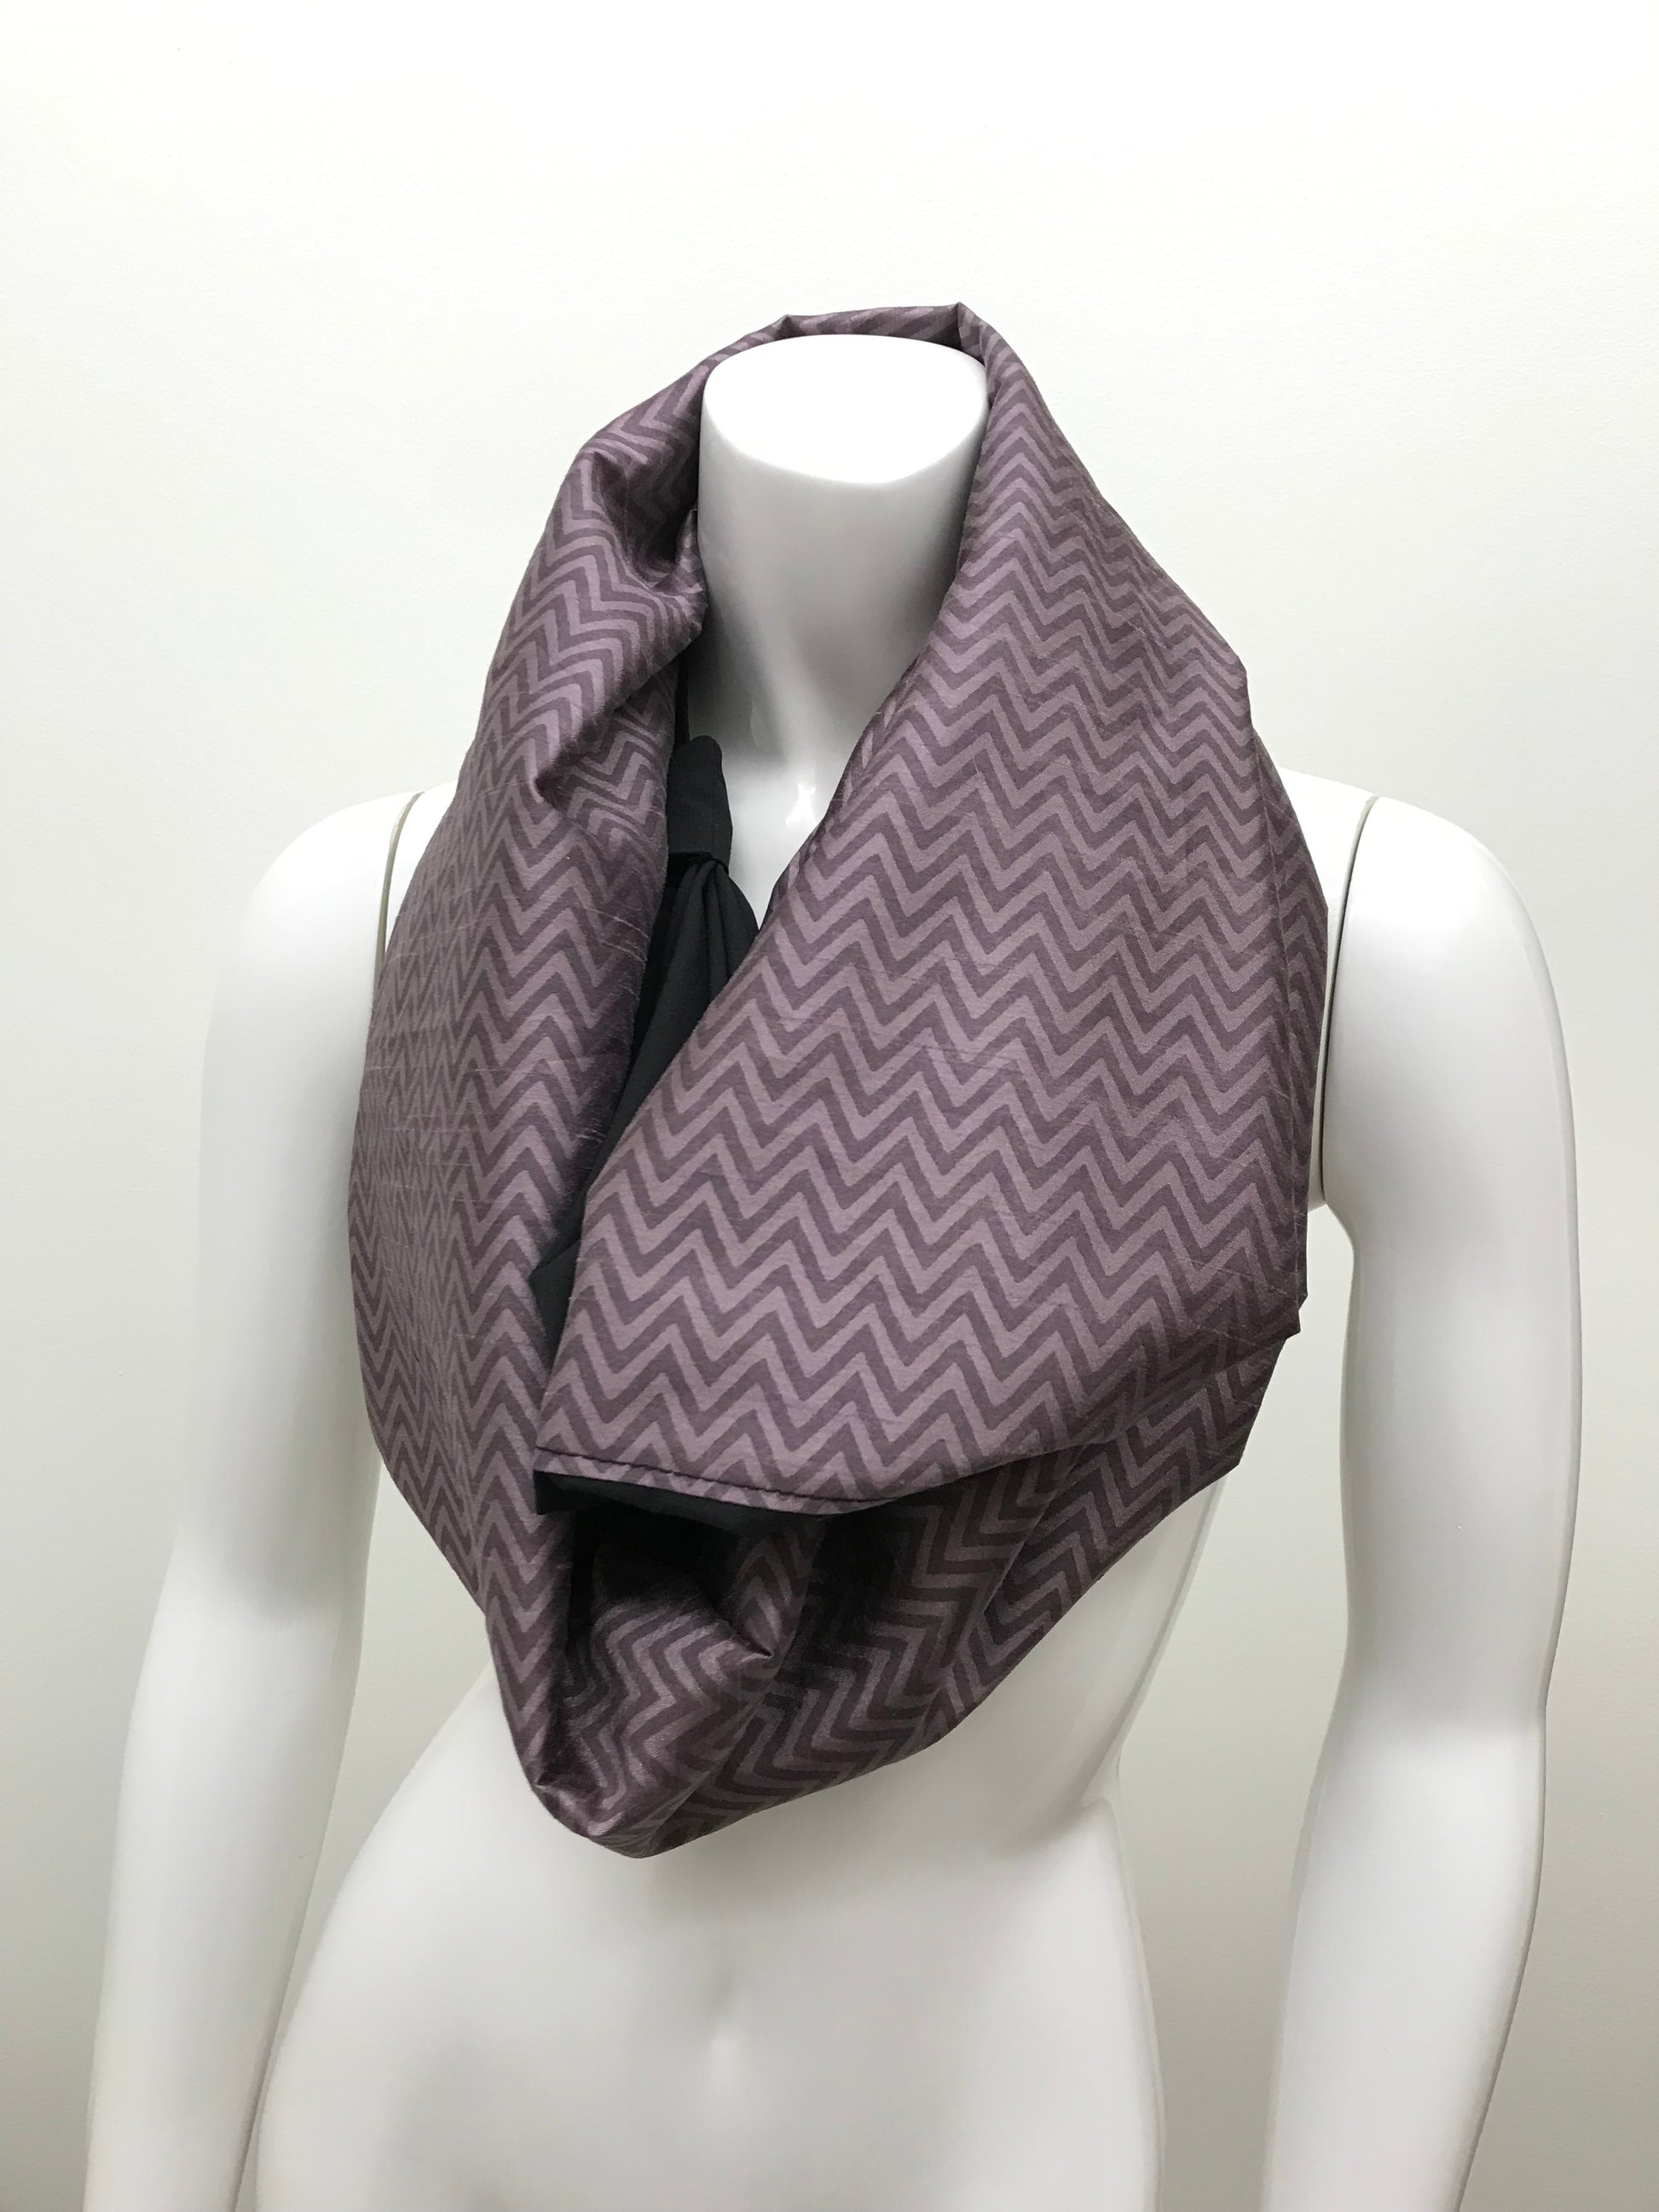 Turn your infinity scarf into a support for your meditation practice, quick snap and adjust to align the spine and sit in comfort. Created by My Yoga Room Elements and produced in Canada . Purple Chevron